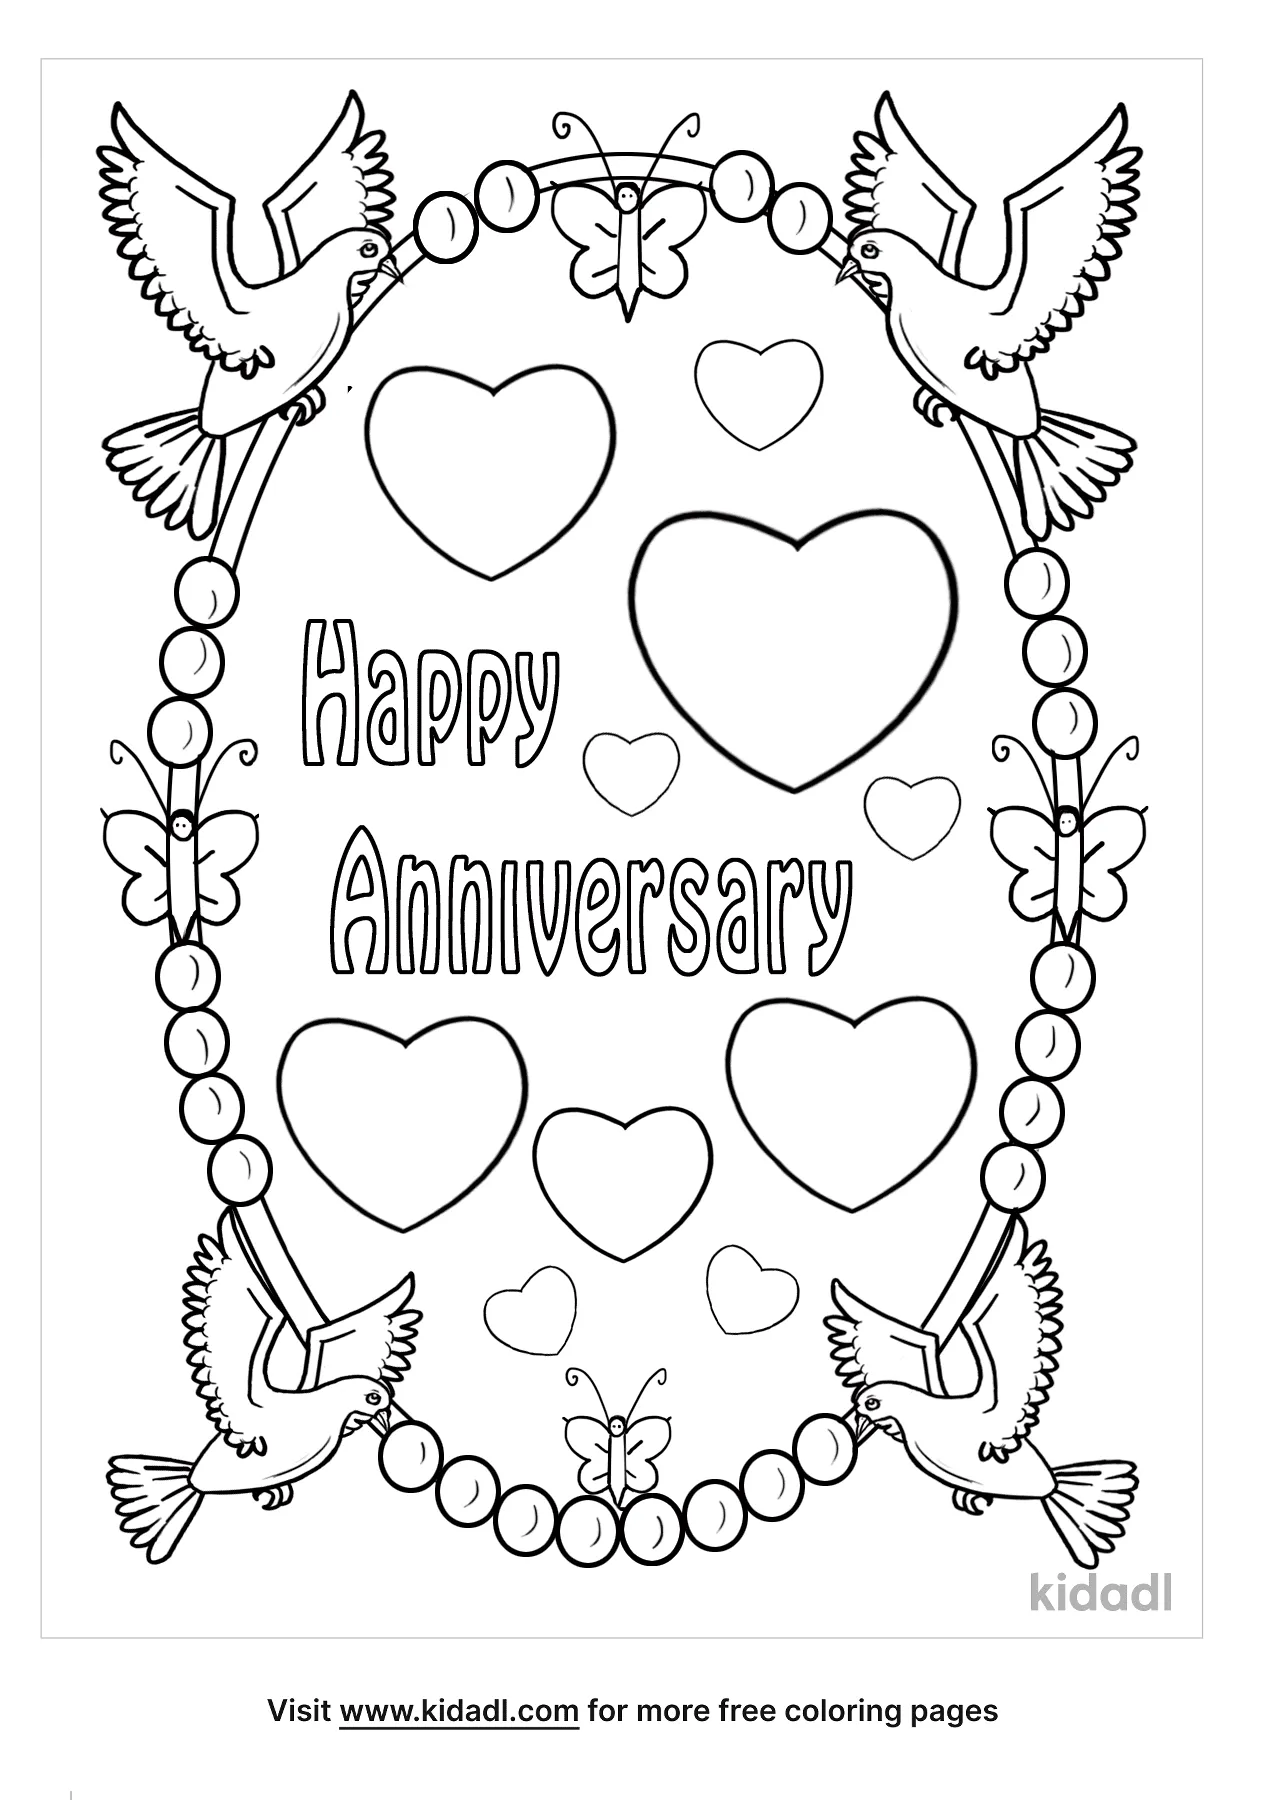 free-anniversary-coloring-page-coloring-page-printables-kidadl